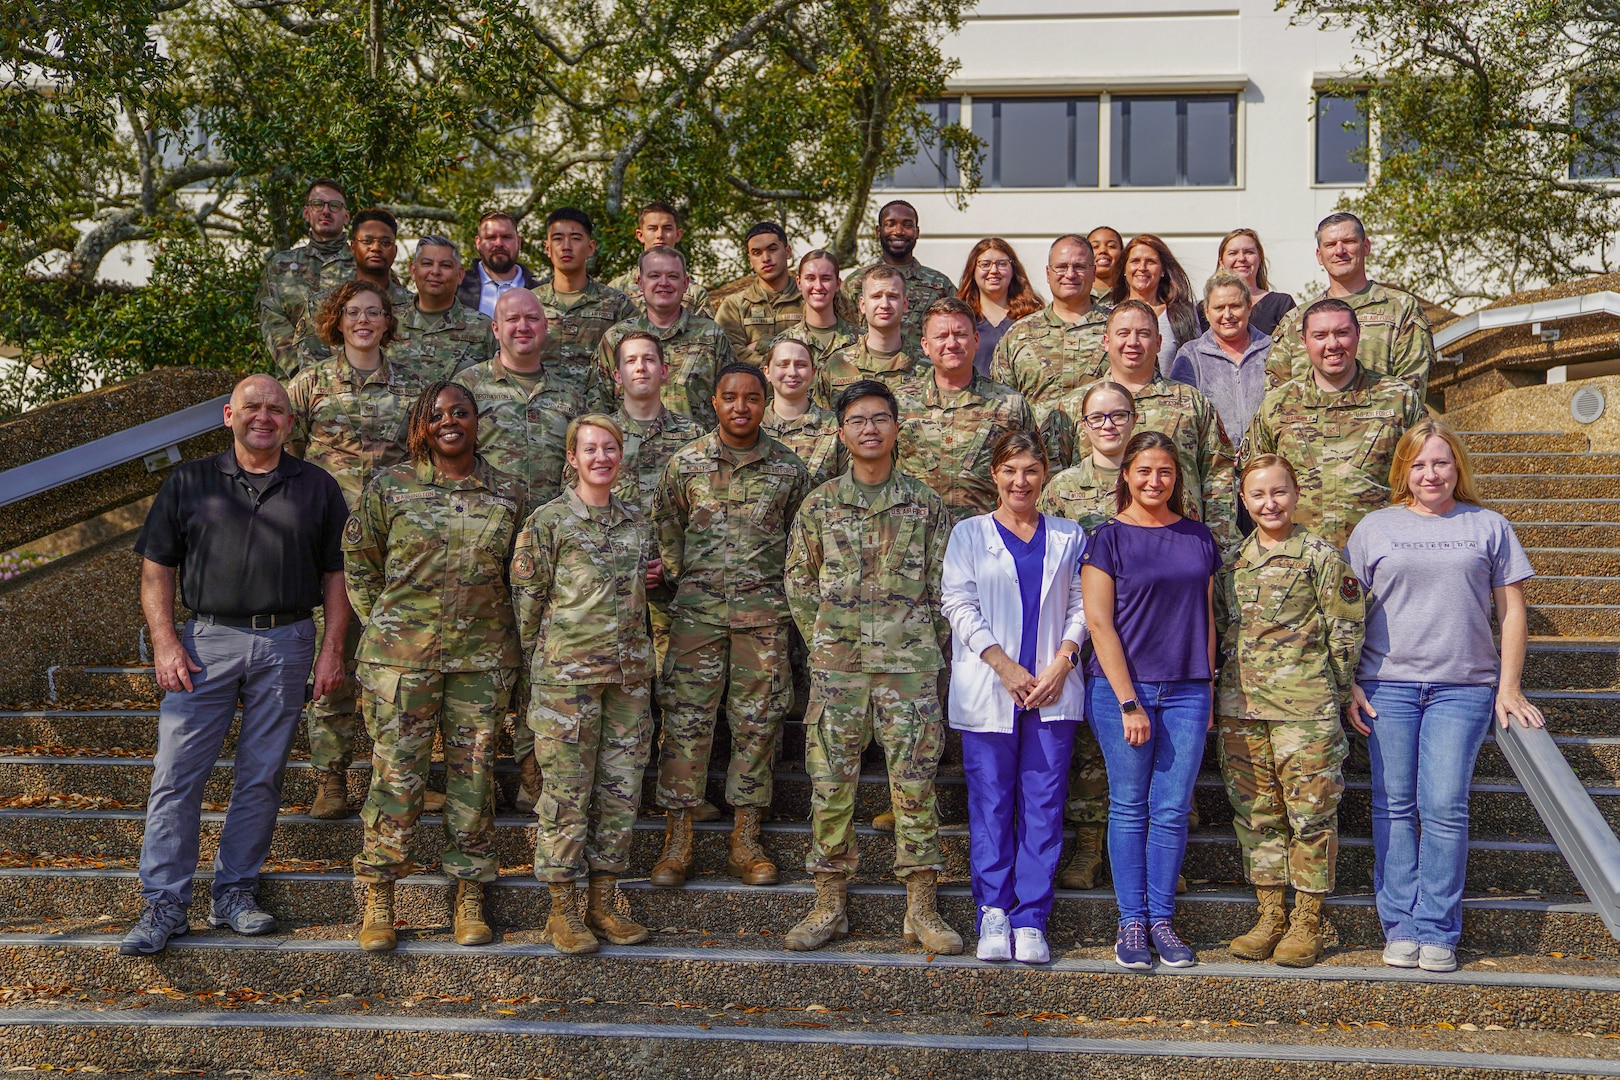 The members from the 81st Medical Diagnostic and Therapeutics Squadron pose for photo outside of the Keesler Medical Center at Keesler Air Force Base, Mississippi, Feb. 28, 2023.